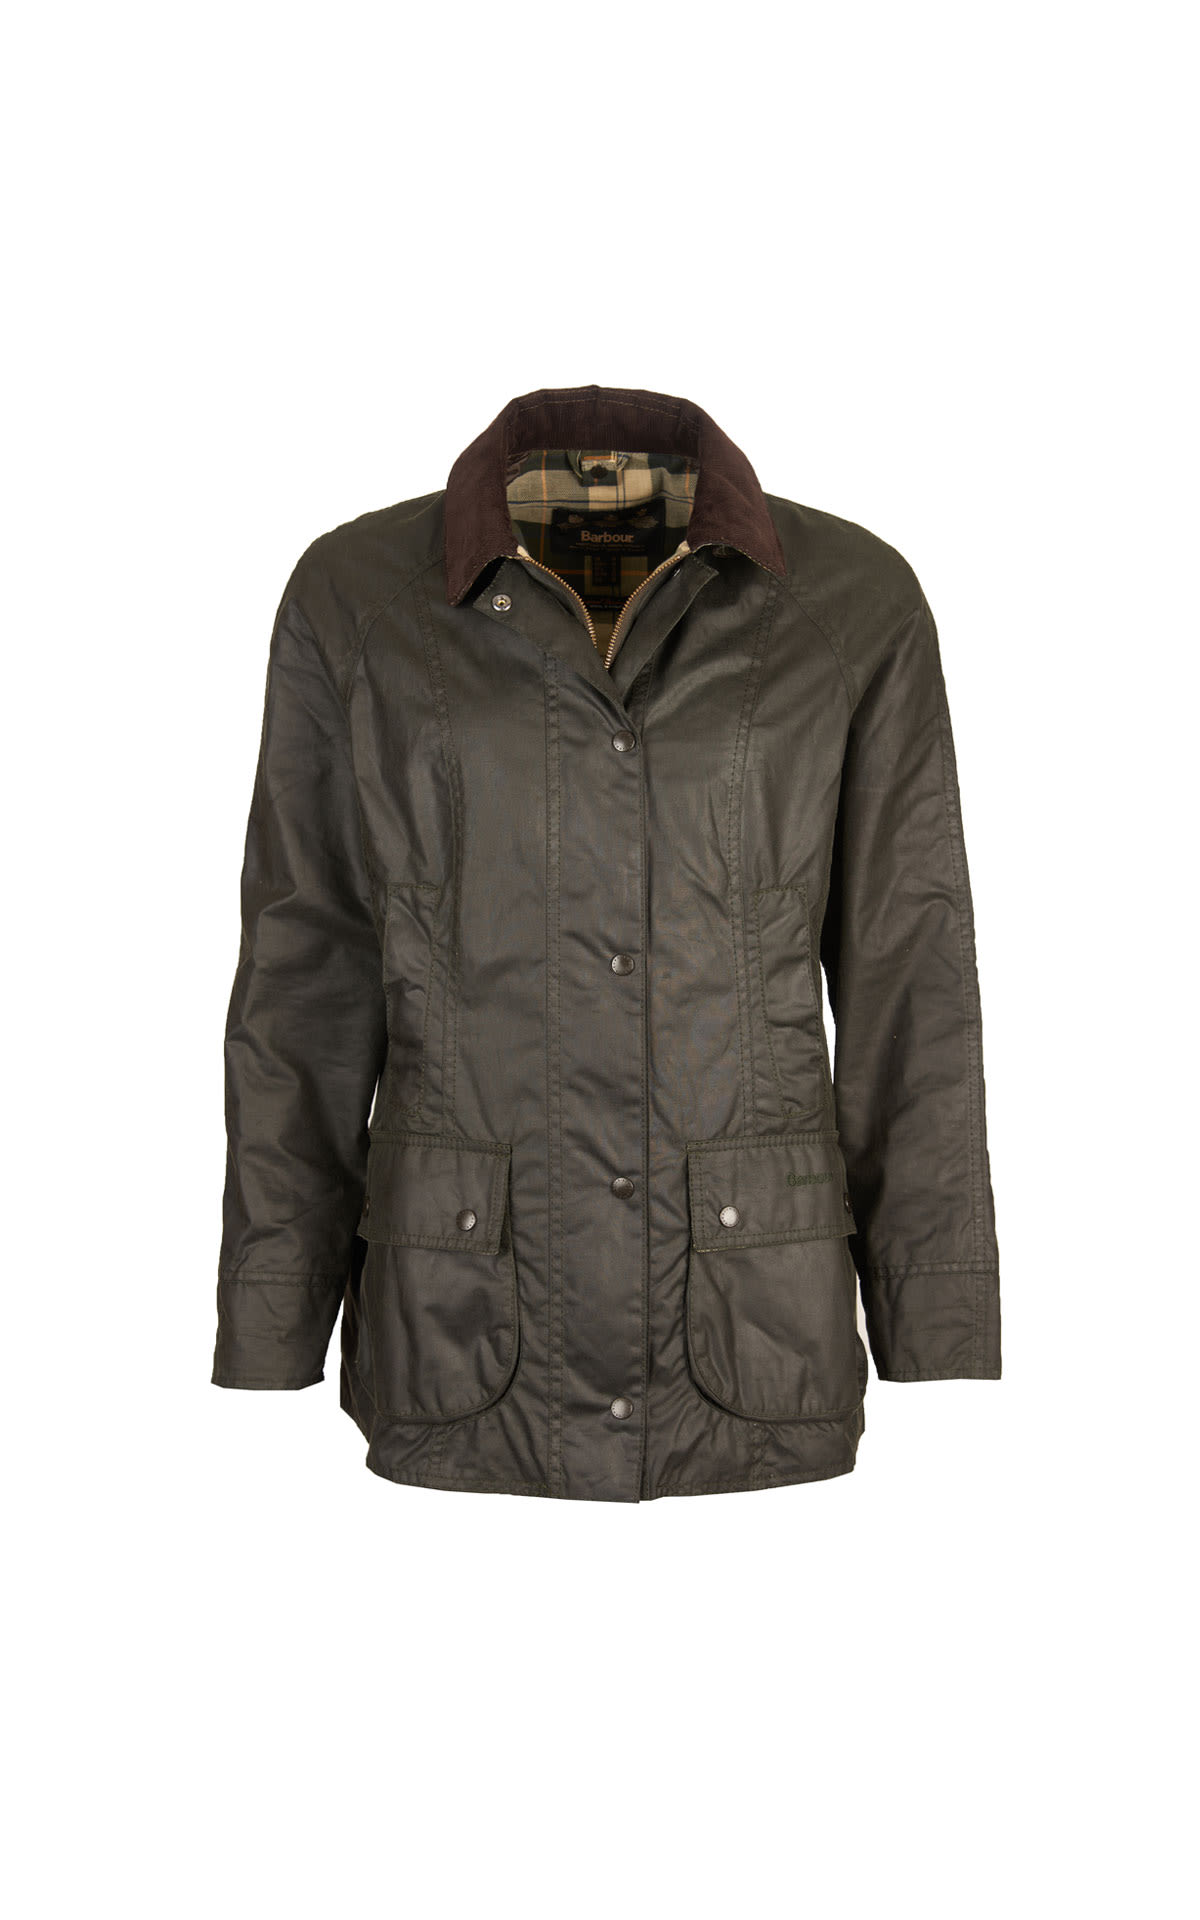 Barbour Beadnell wax jacket from Bicester Village